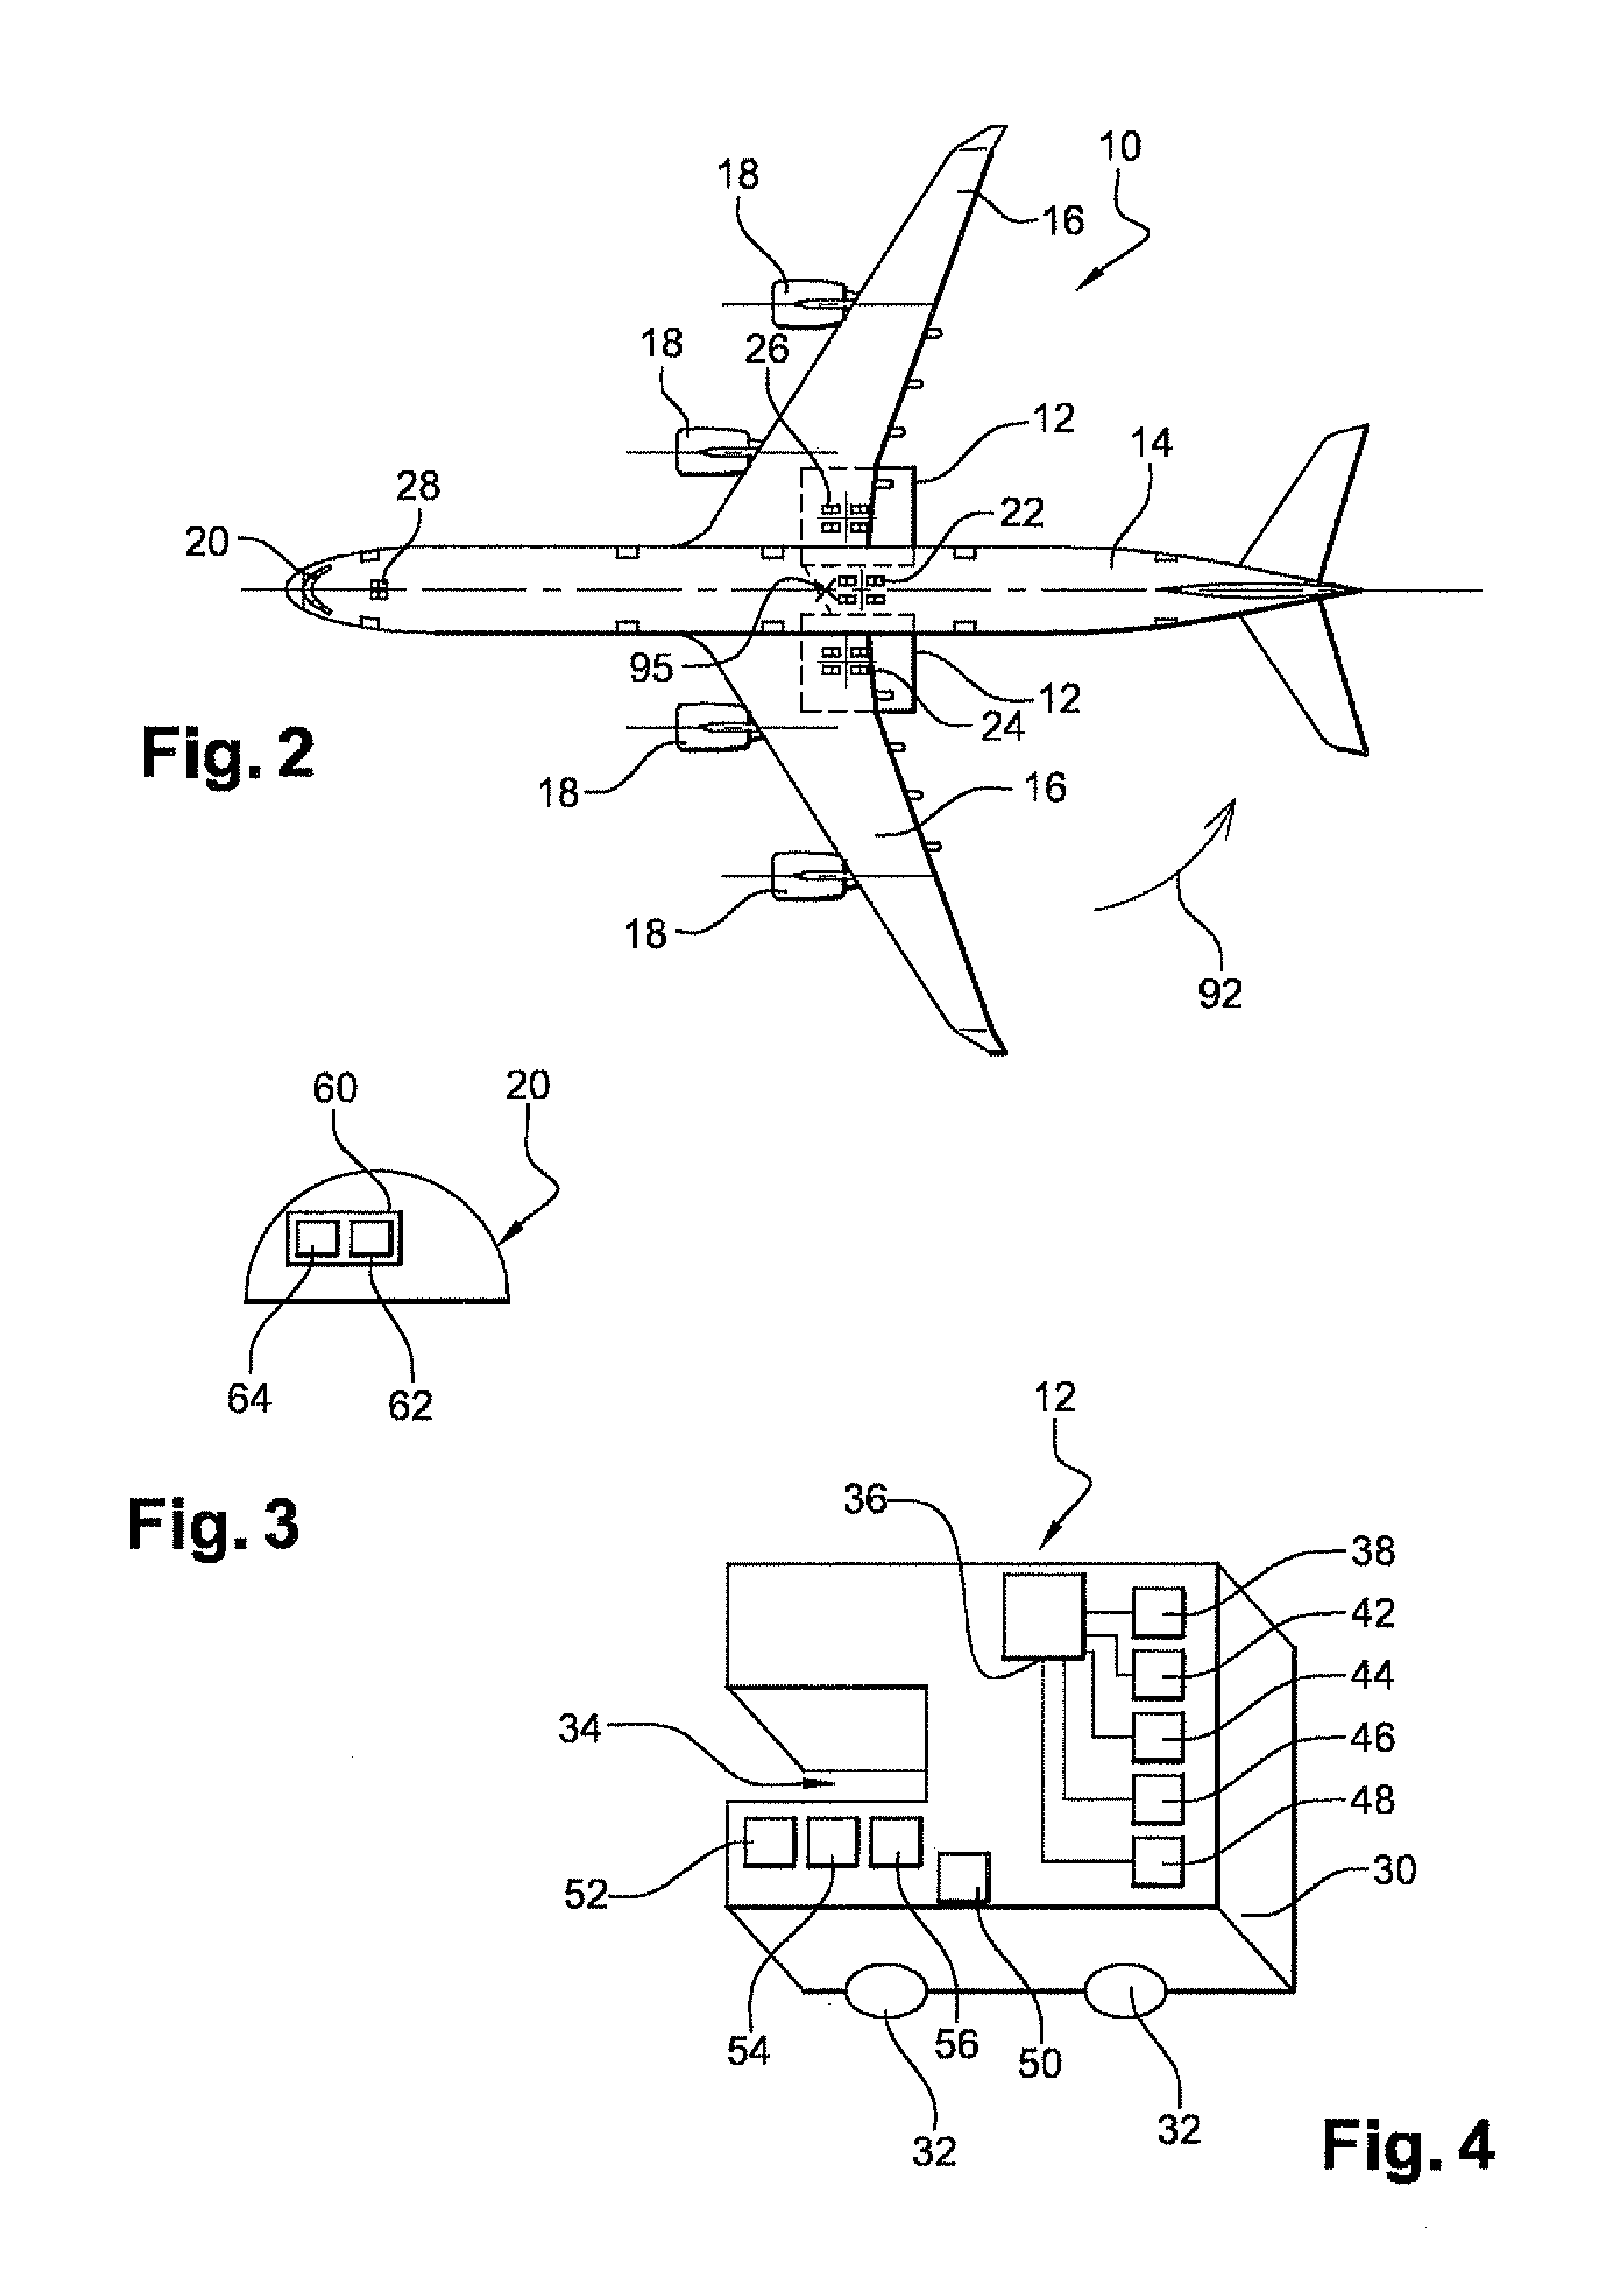 Method for moving an aircraft along the ground